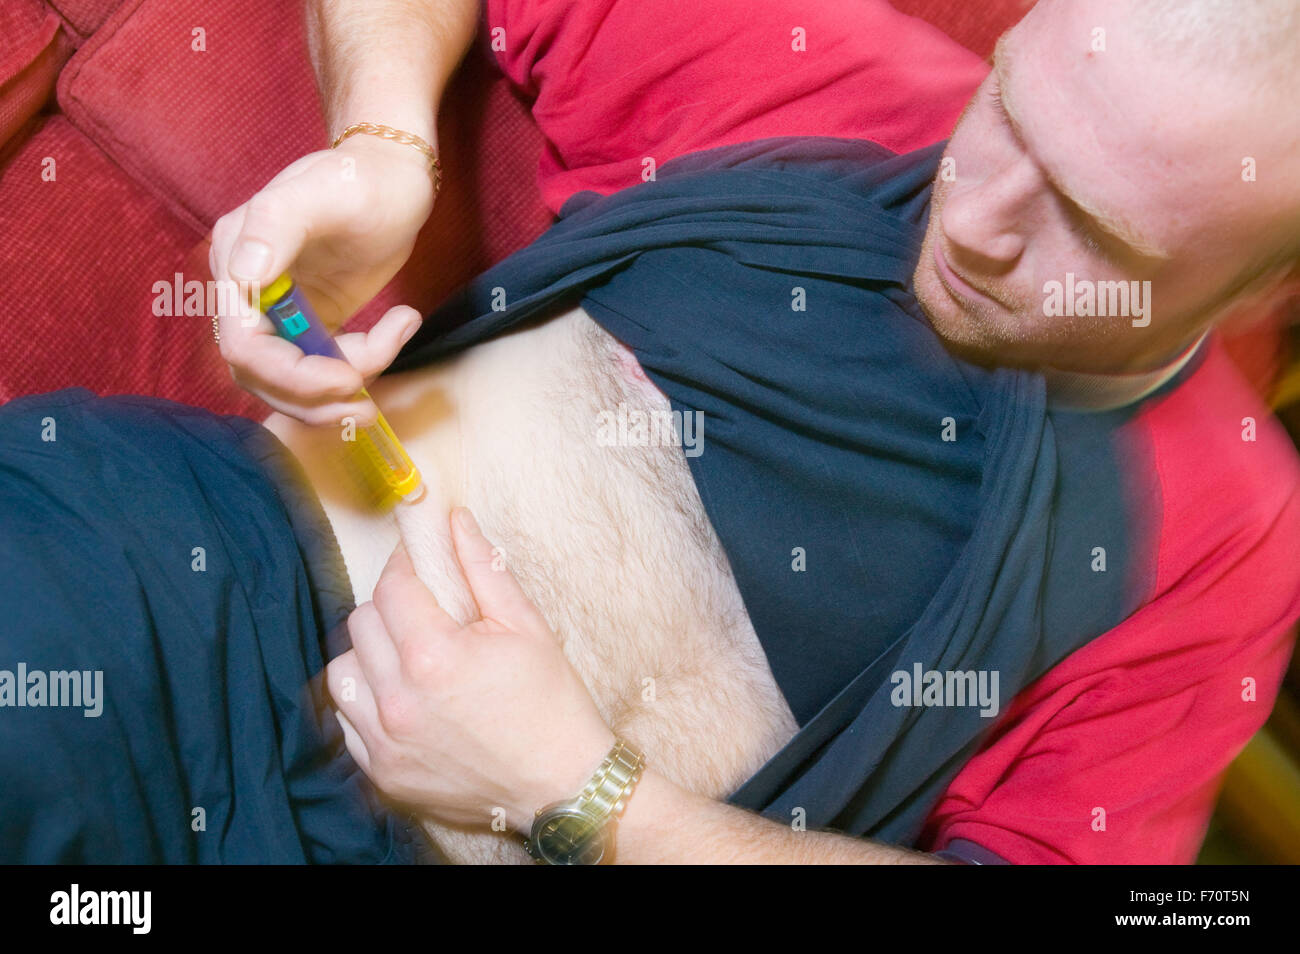 Man with Diabetes injecting insulin into his stomach, Stock Photo